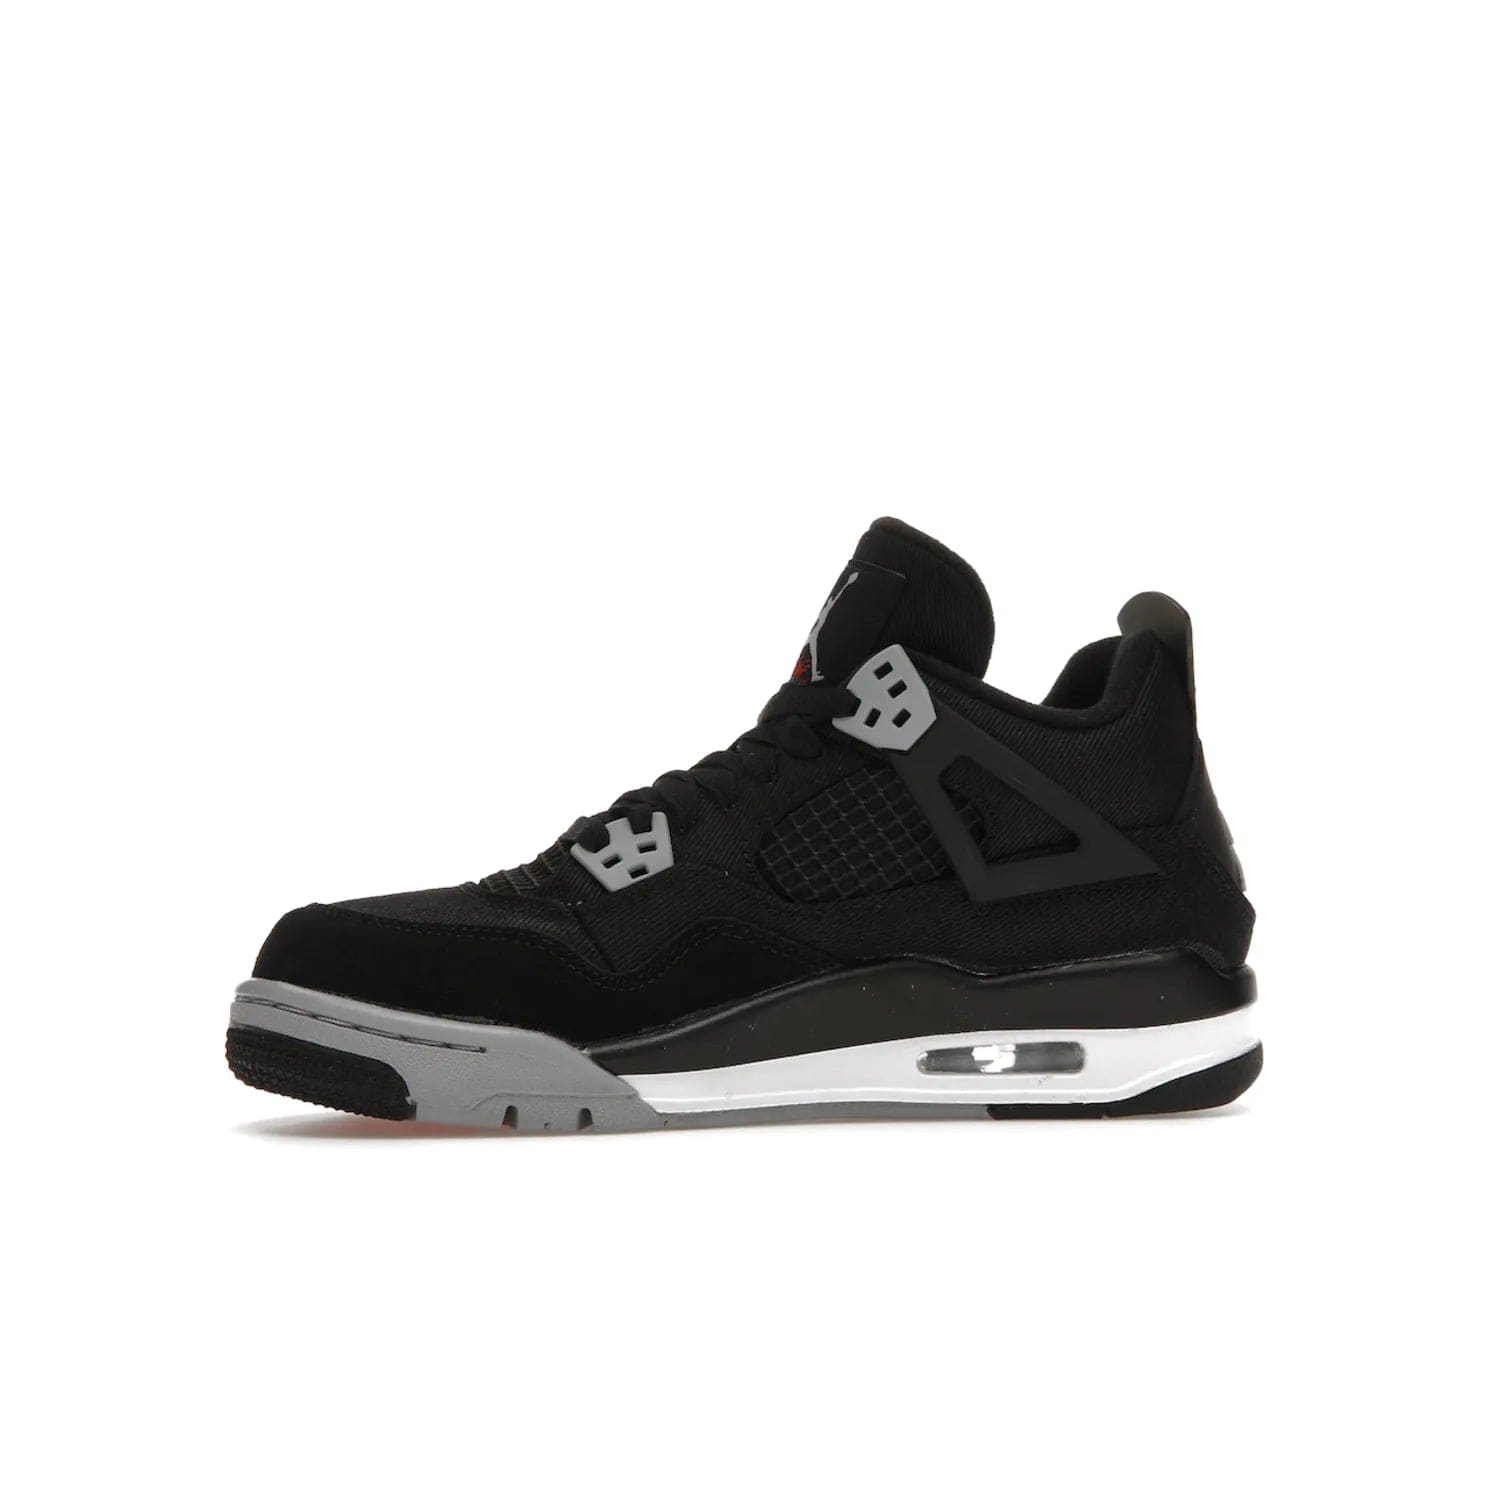 Jordan 4 Retro Black Canvas (GS) - Image 18 - Only at www.BallersClubKickz.com - Premium Air Jordan 4 Retro Black Canvas in grade-schooler's catalog. Featuring black suede canvas upper, grey molding, accents in red, white midsole, woven Jumpman tag, & visible AIR cushioning. Releasing Oct. 1, 2022.